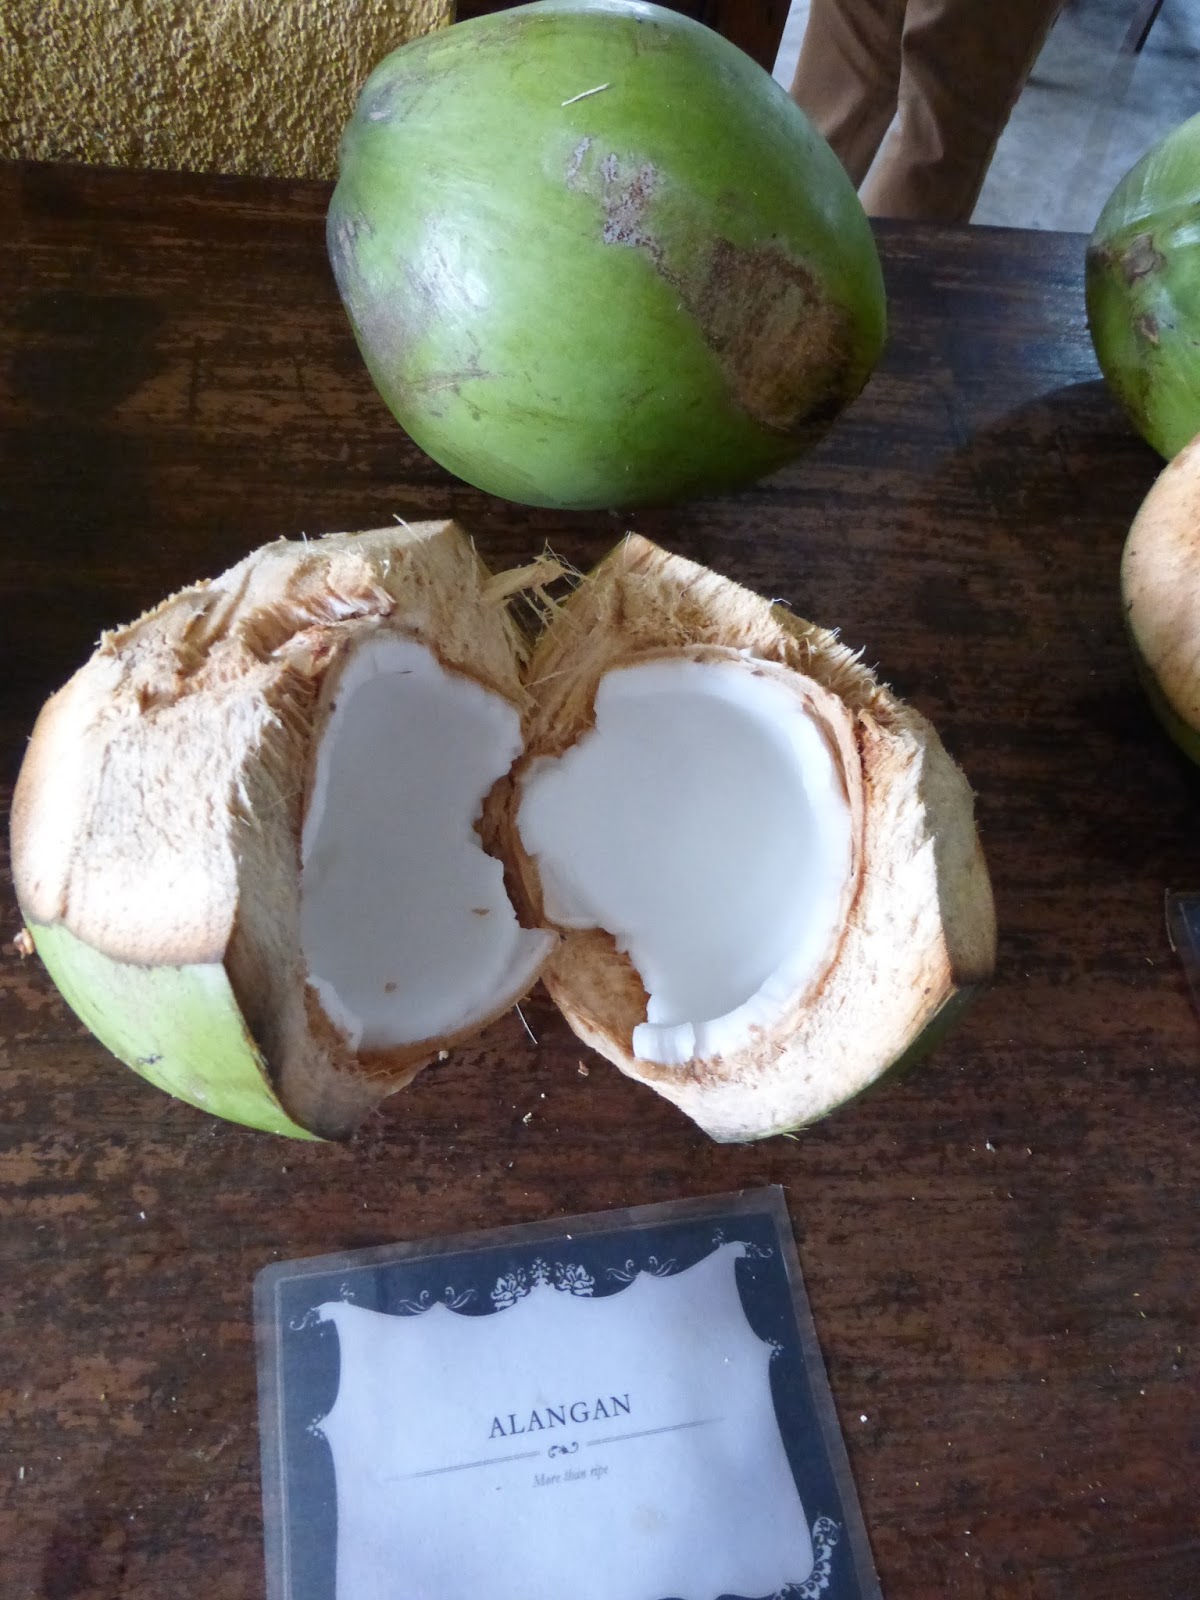 COCONUT 101: Food Products from the Coconut Tree